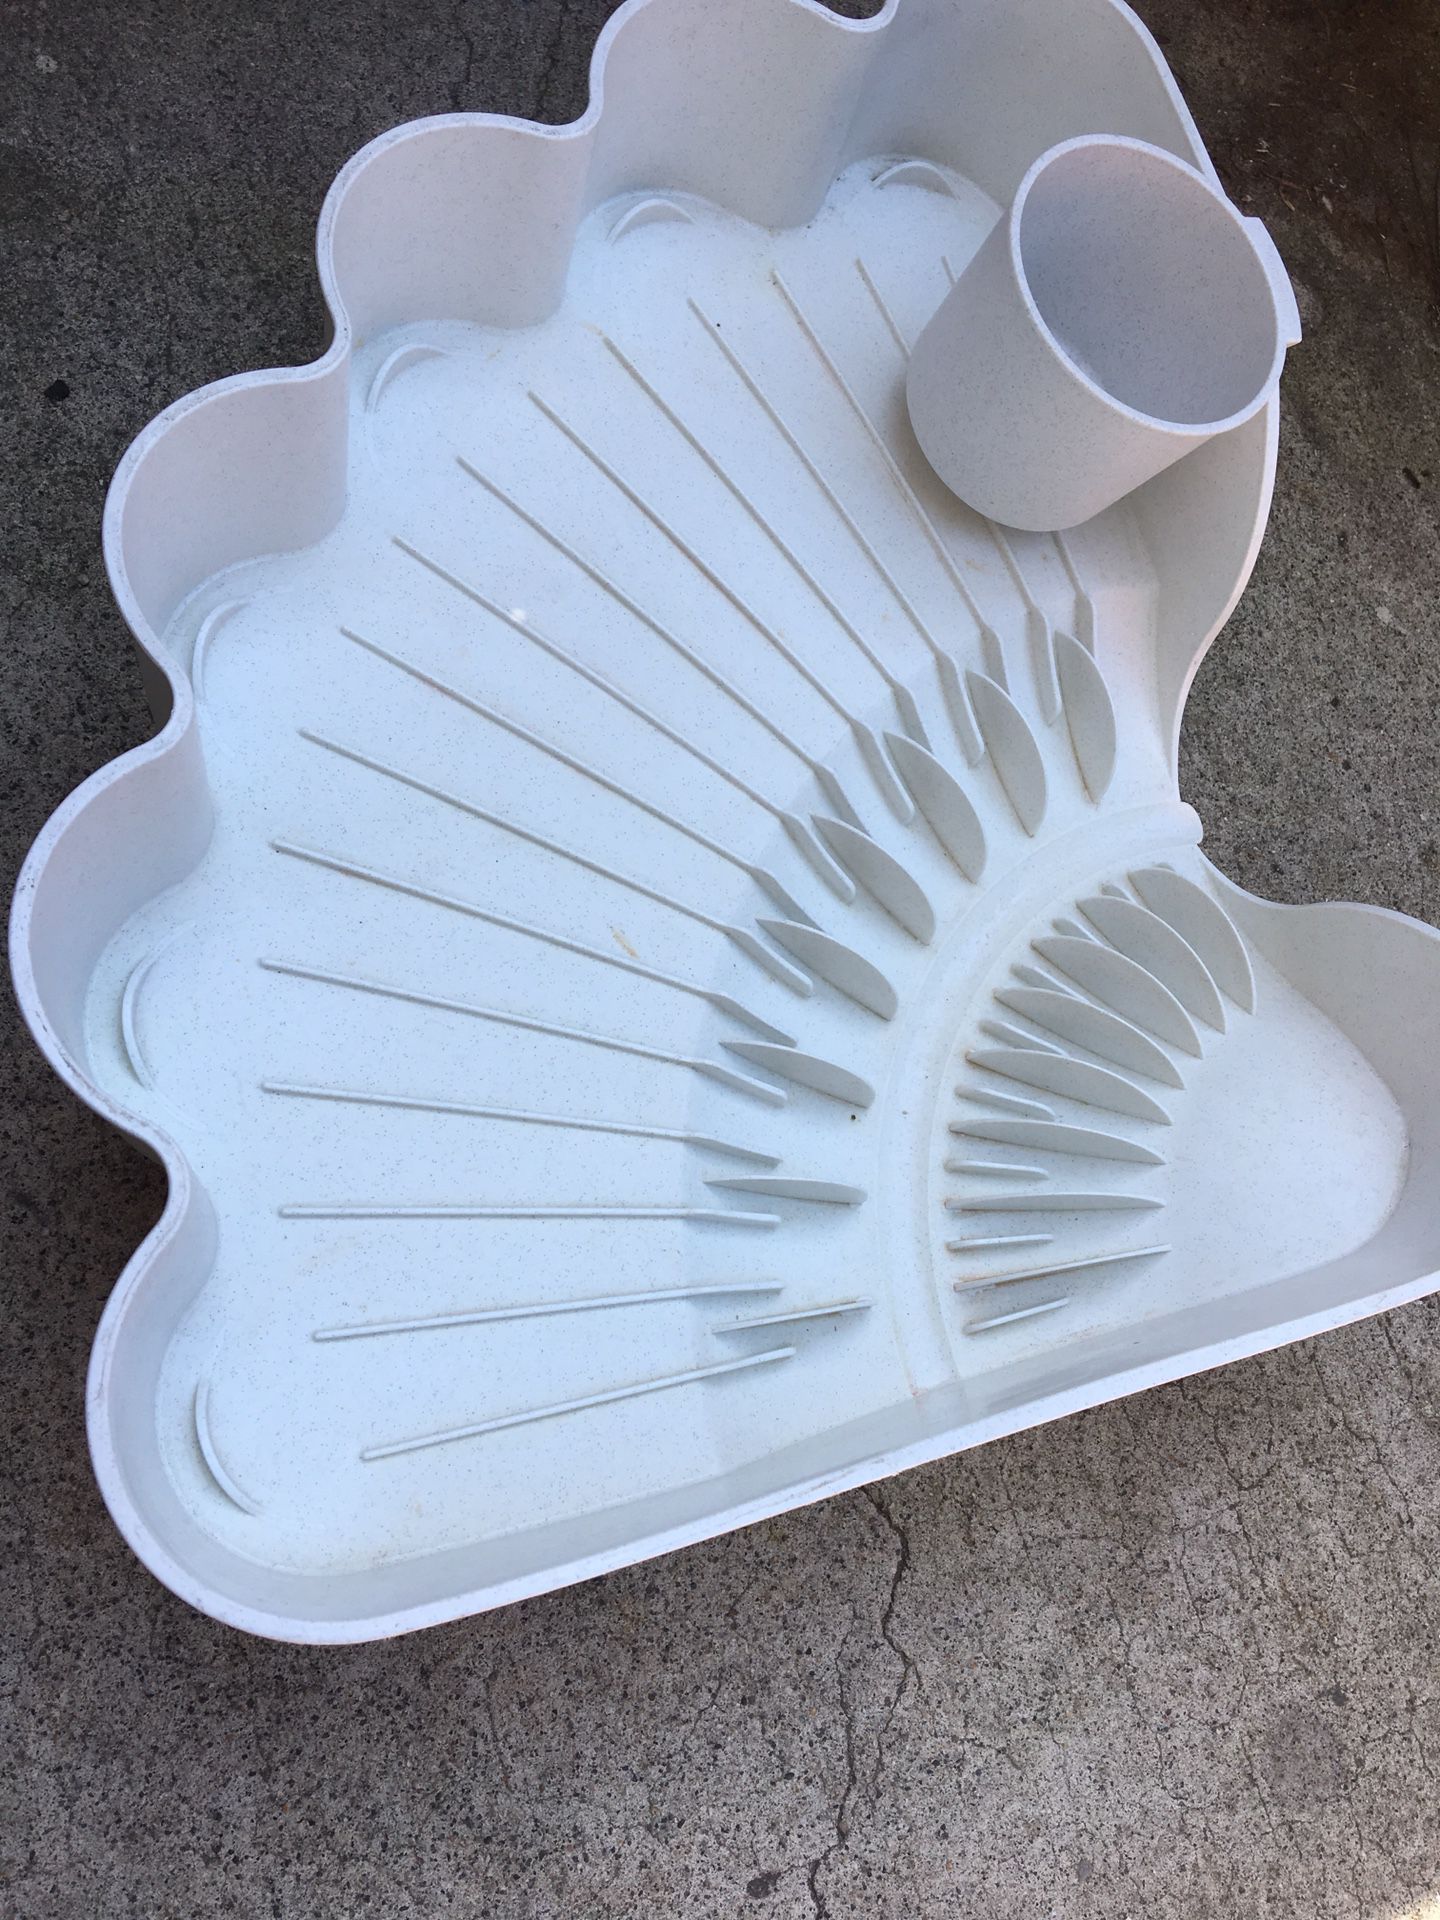 Kitchen Aid Compact Dish-drying Rack for Sale in Tracy, CA - OfferUp